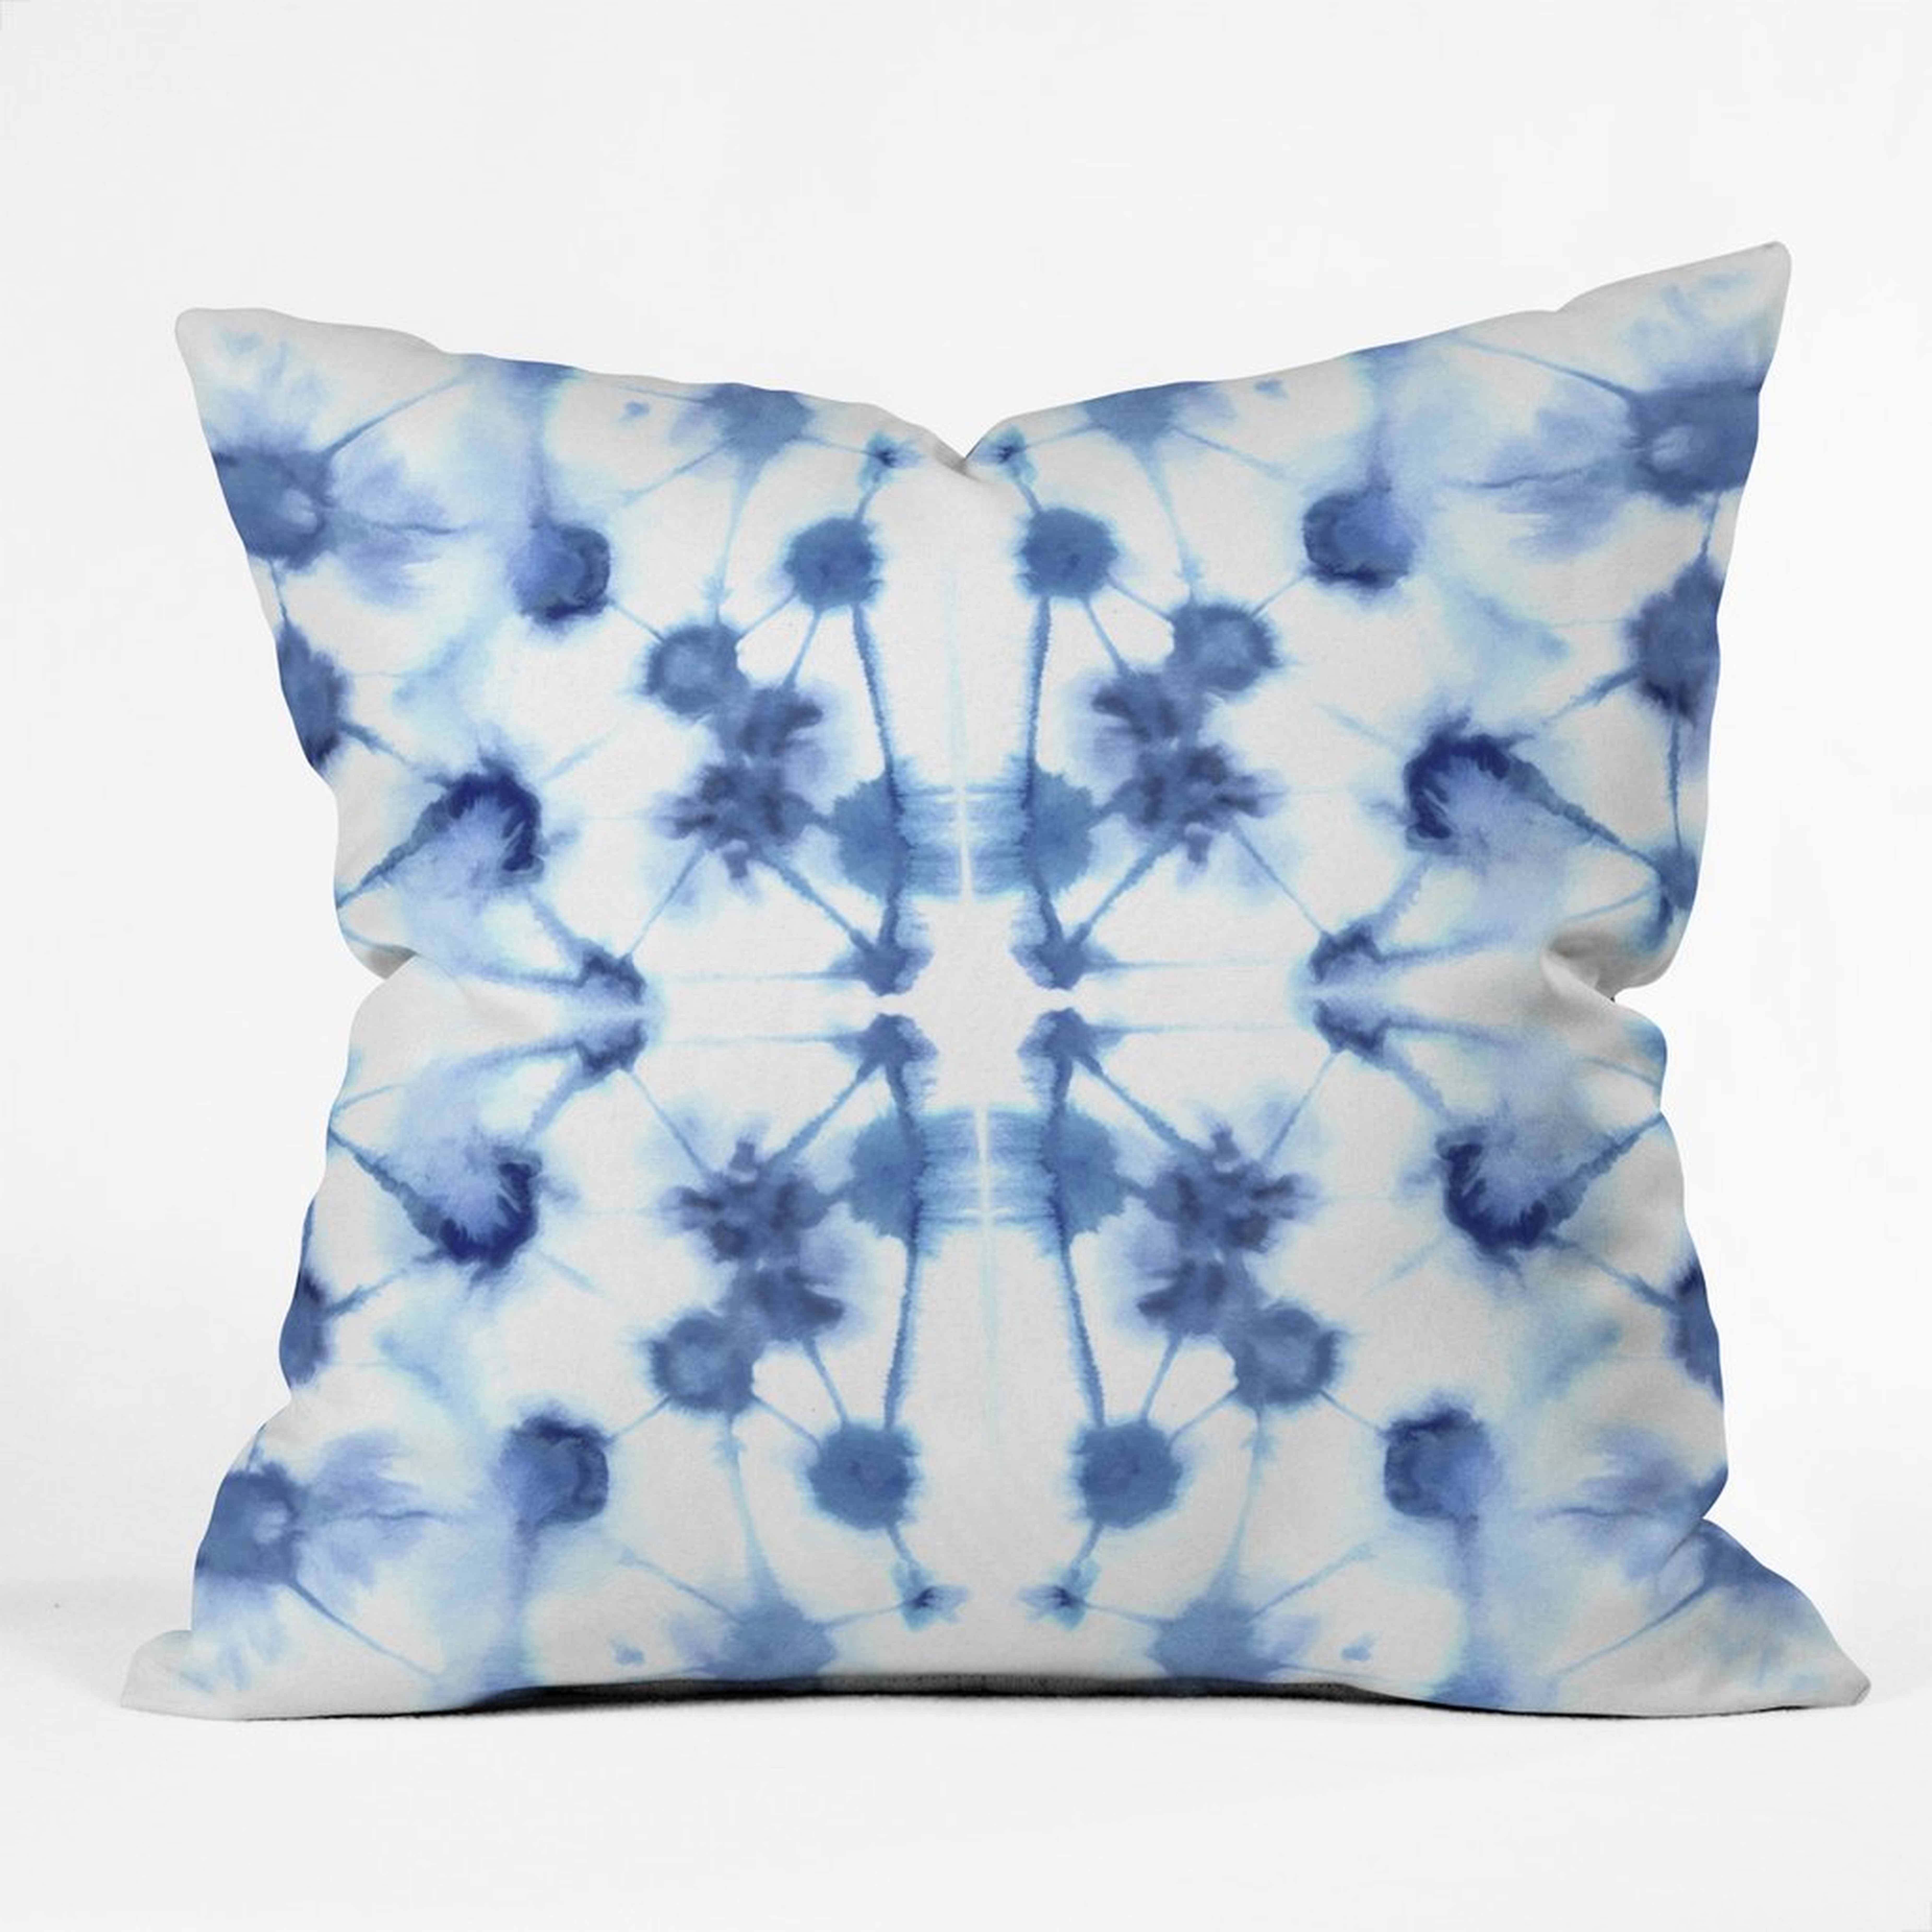 MIRROR DYE BLUE Throw Pillow - 16" x 16" - Insert included - Wander Print Co.